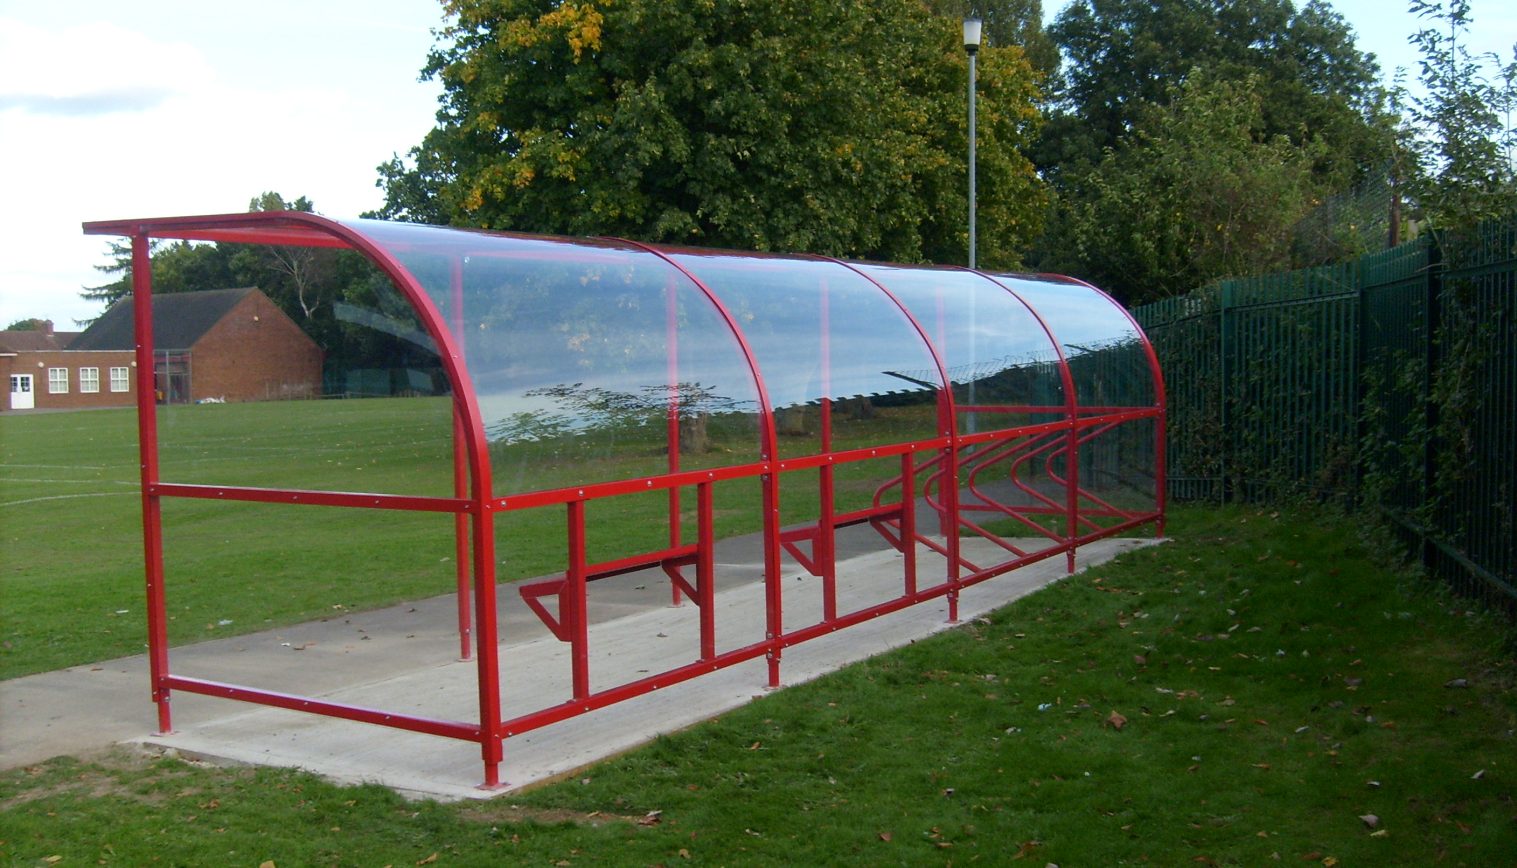 Kingsway Infant School – Cycle Shelter